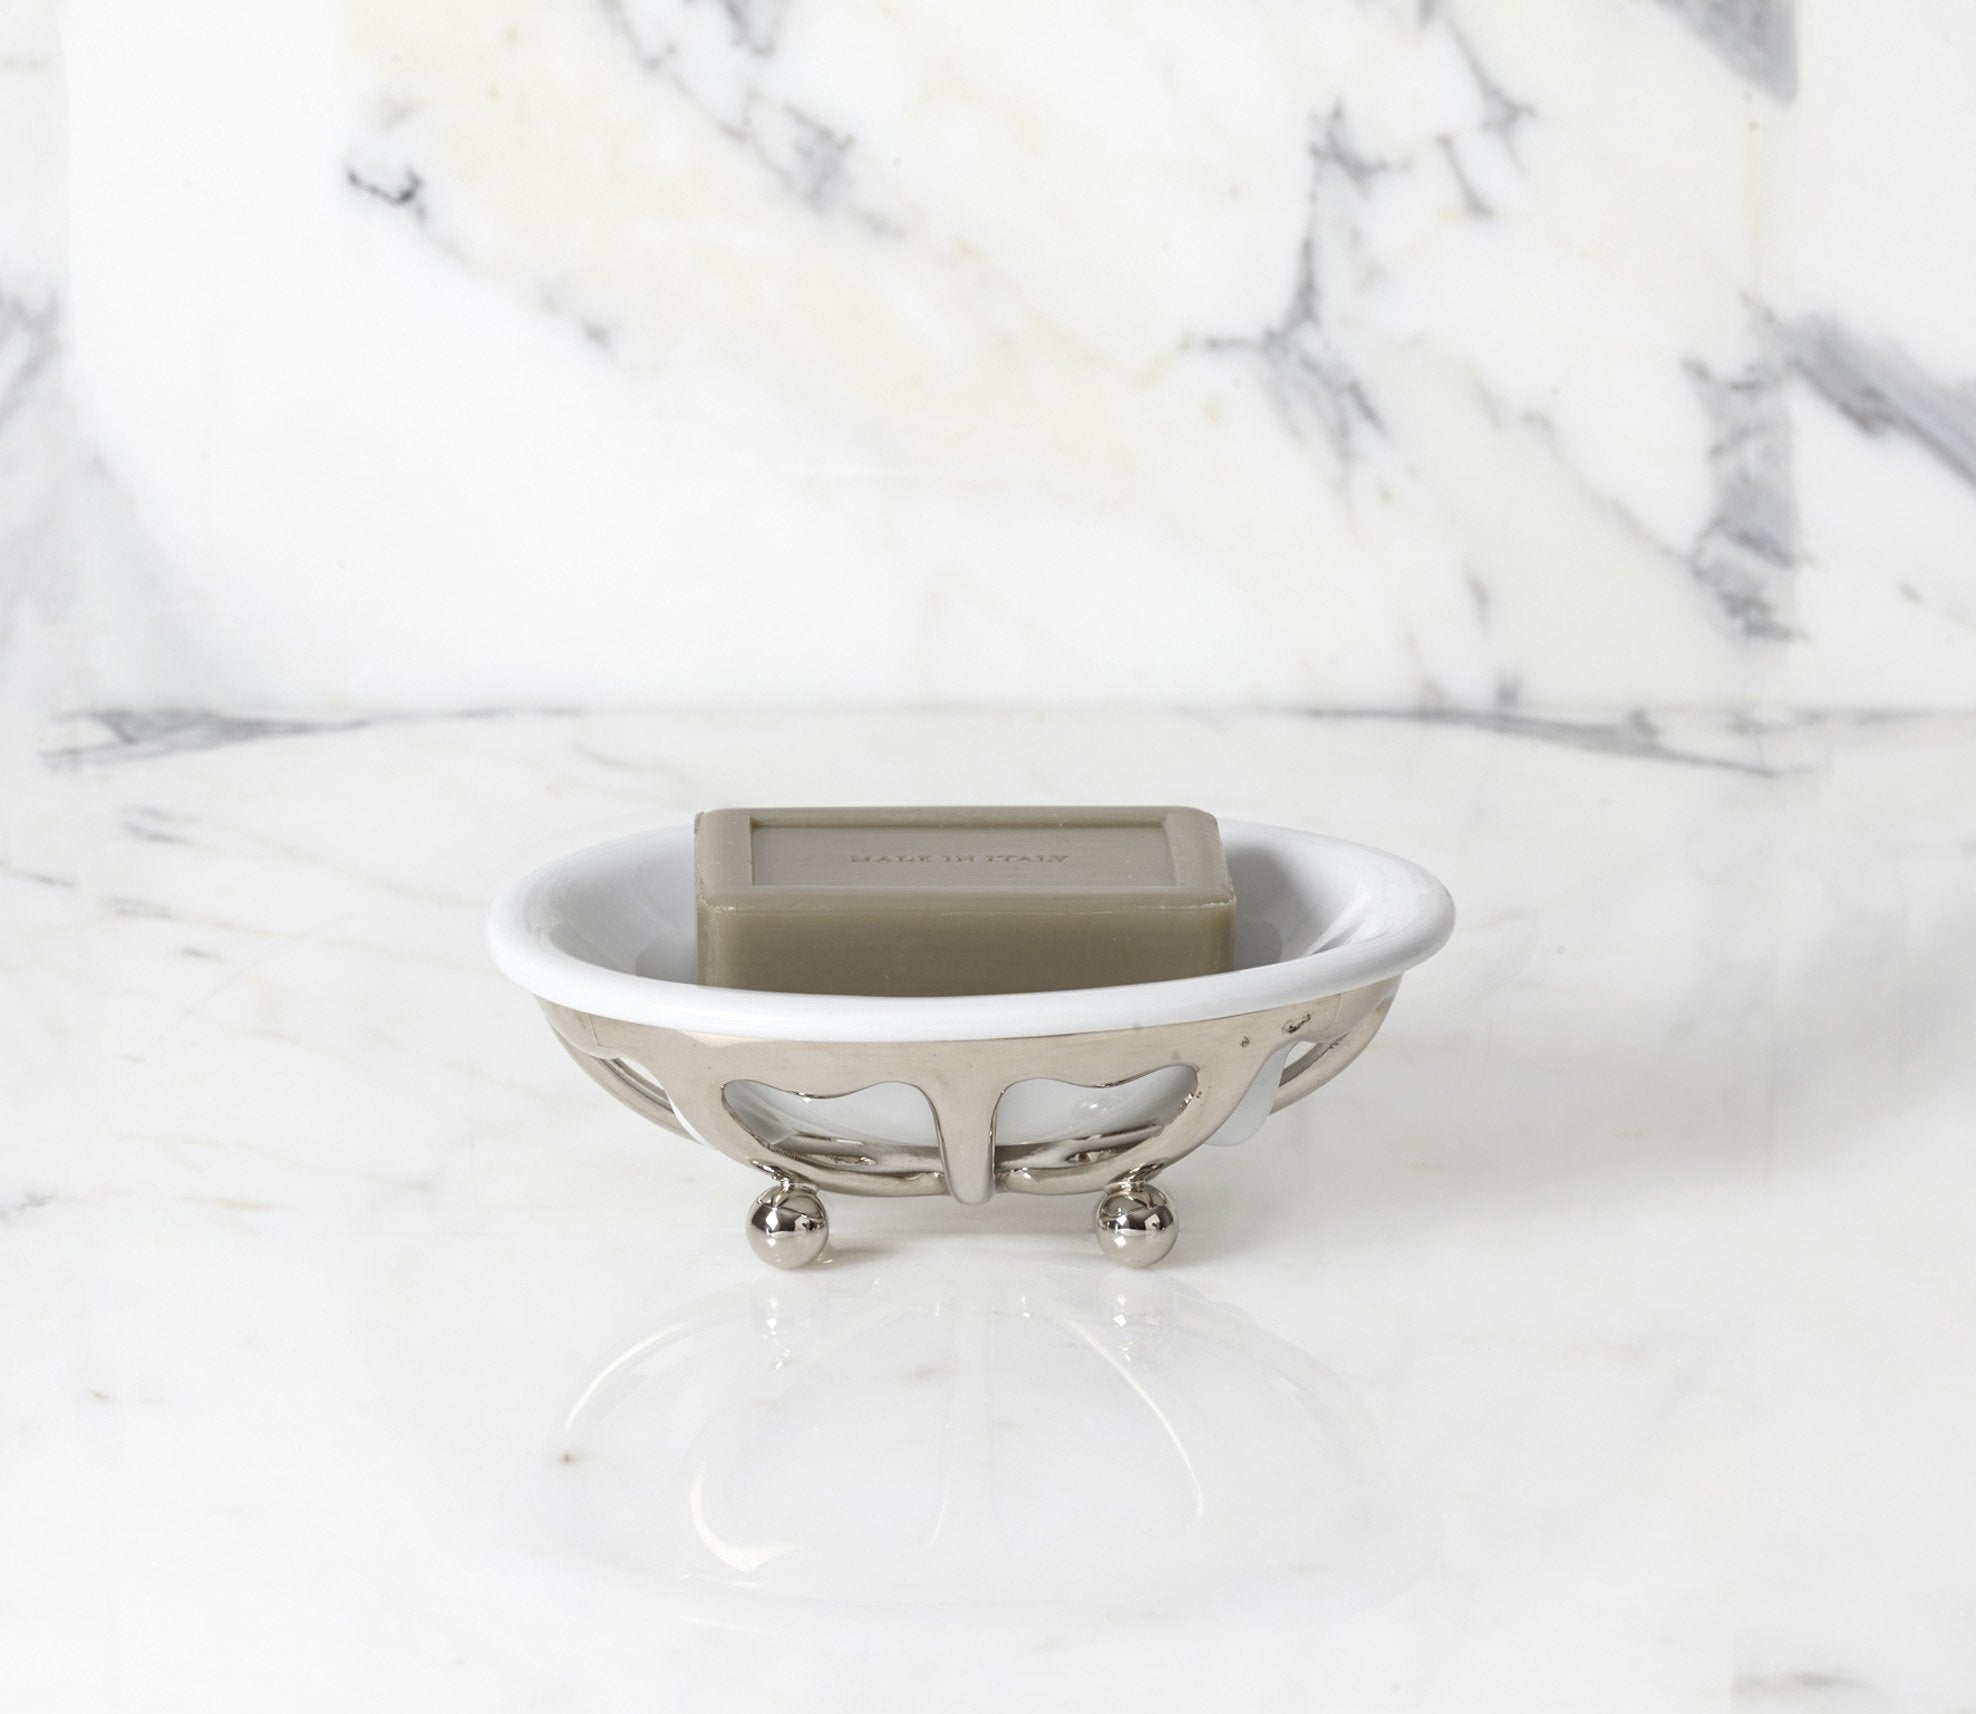 Classic Soap Dish with White Porcelain Product Image 1